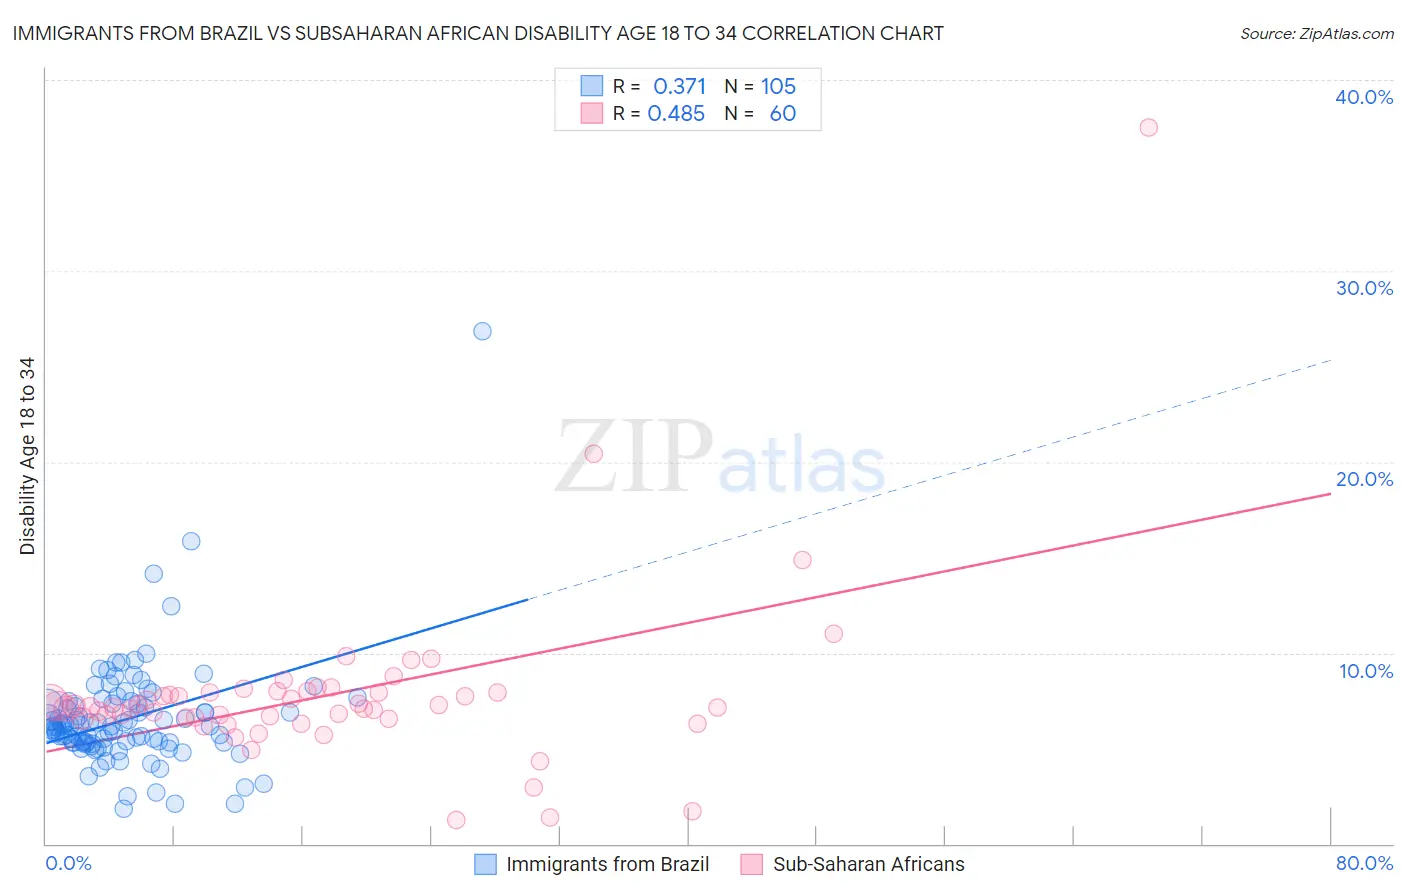 Immigrants from Brazil vs Subsaharan African Disability Age 18 to 34